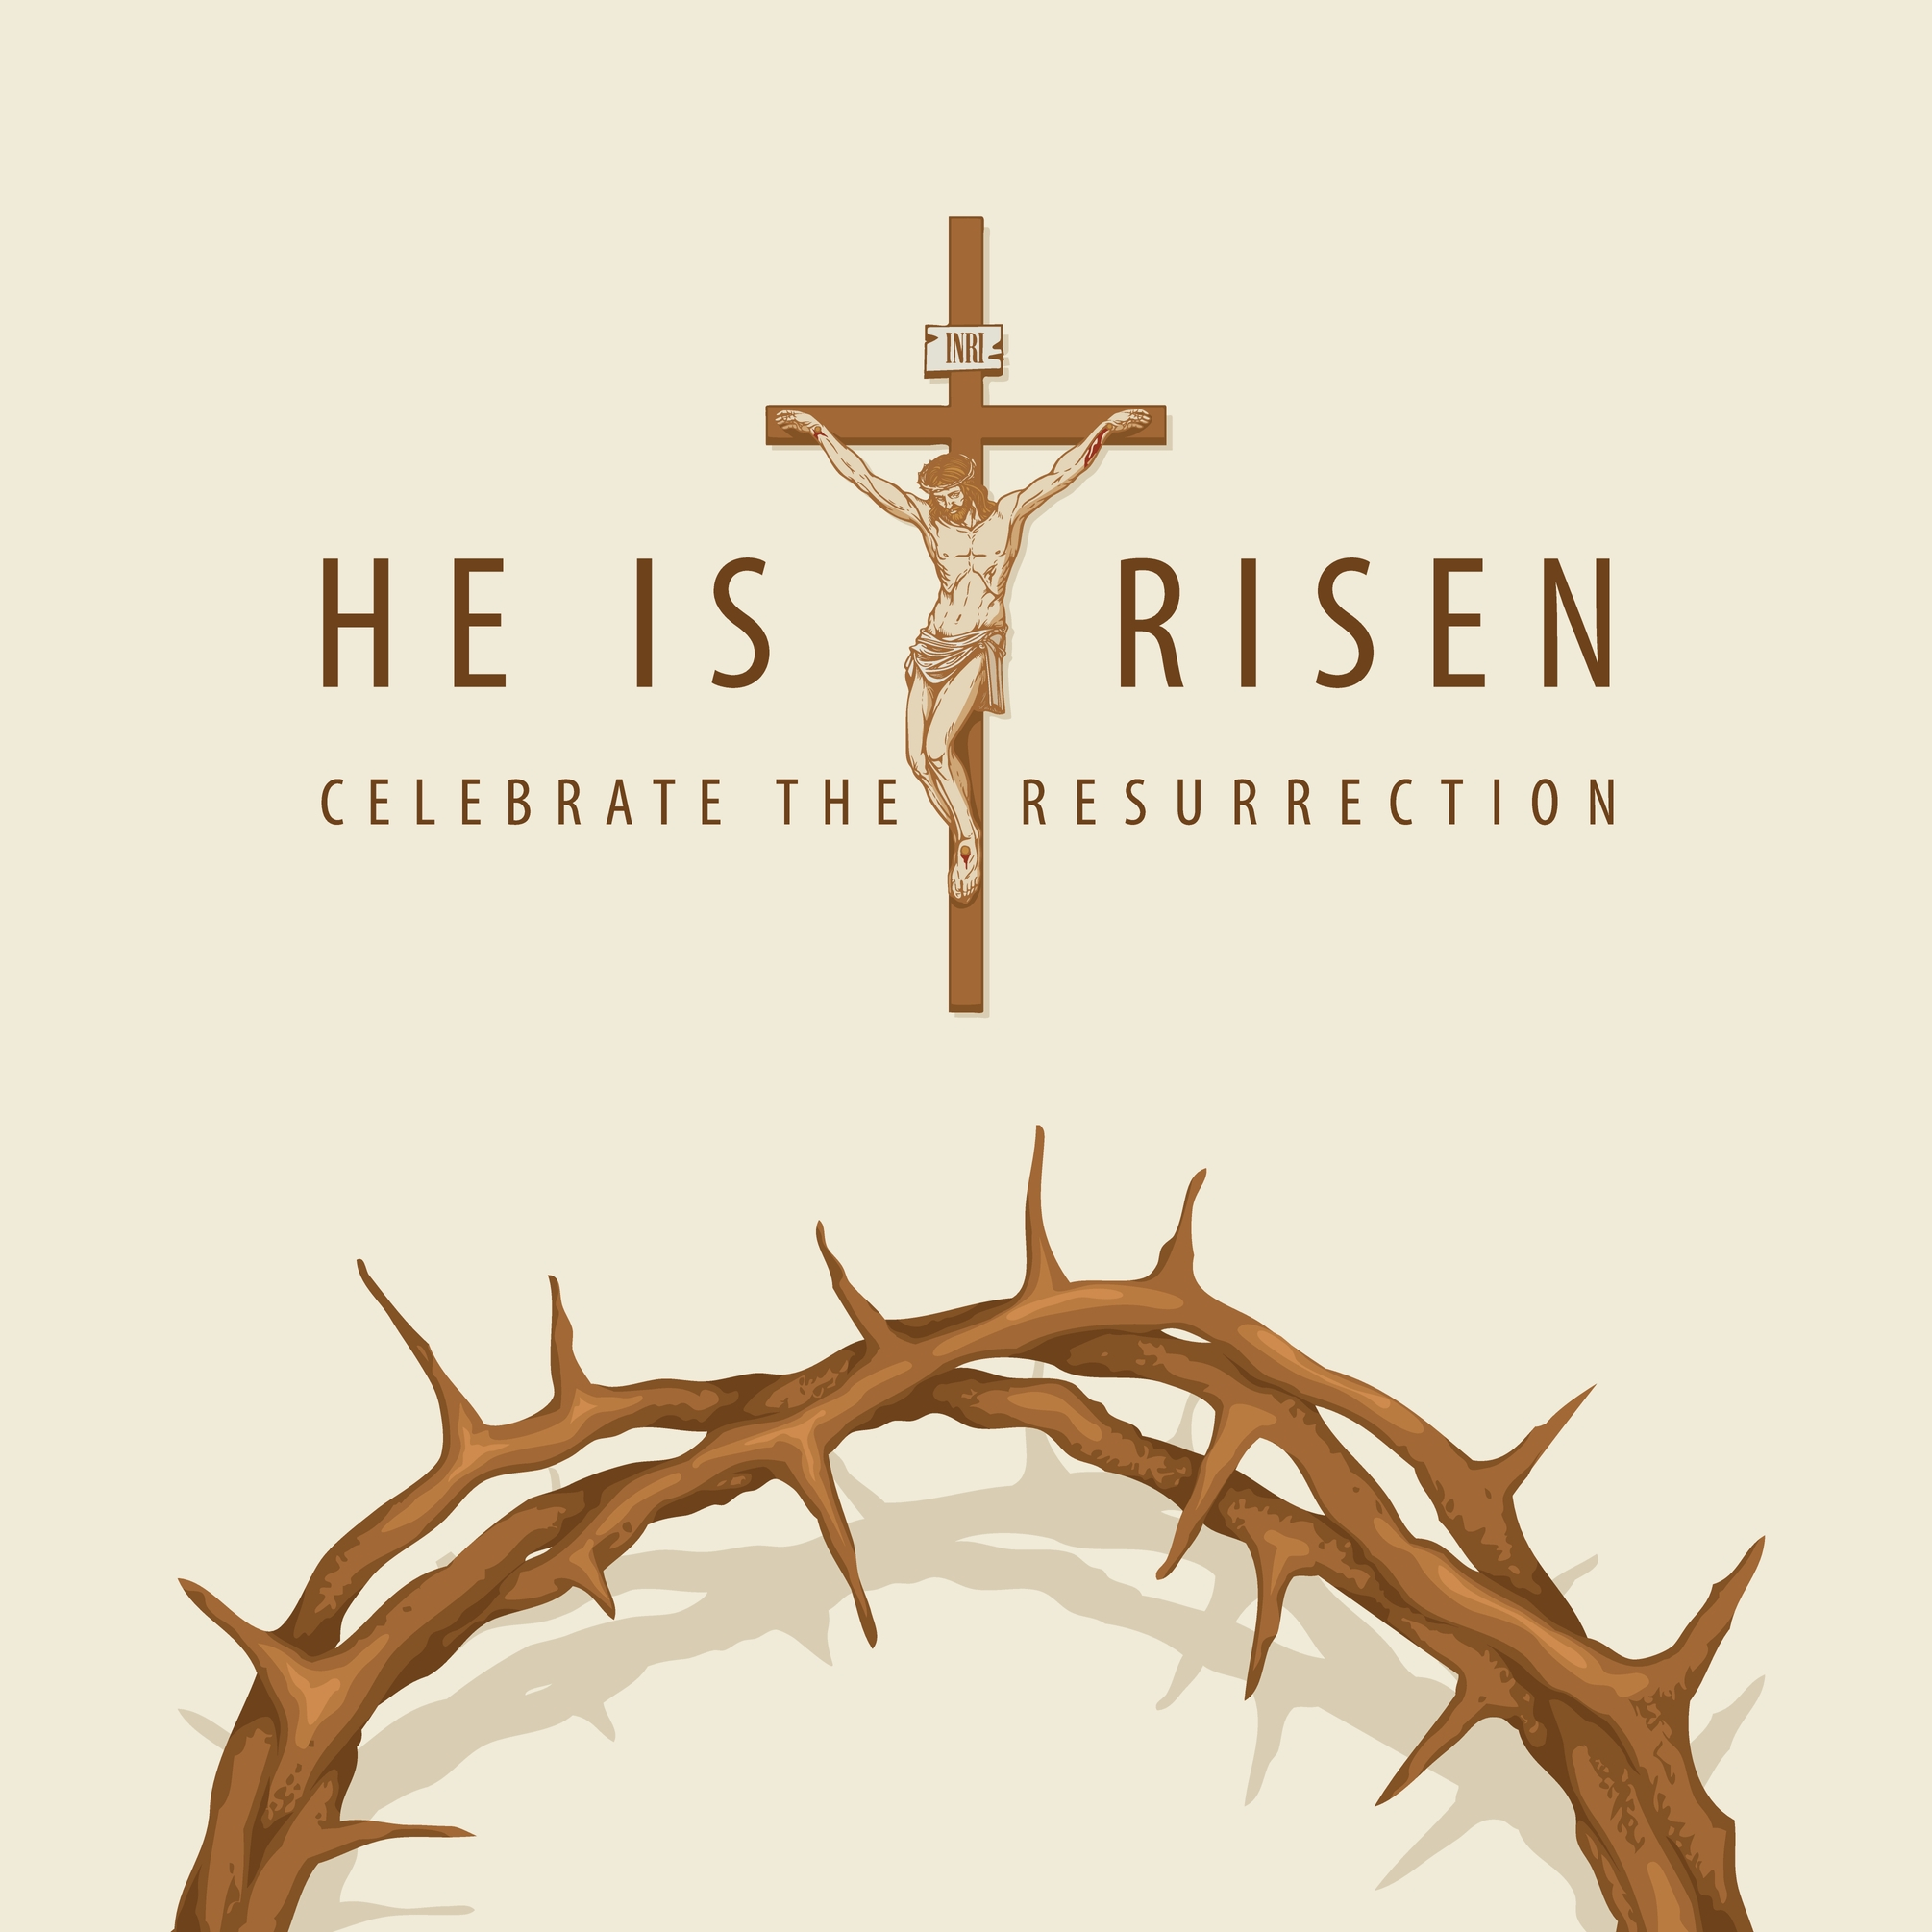 Happy Easter 2022 Wishes, Images, Status, Quotes, Messages and